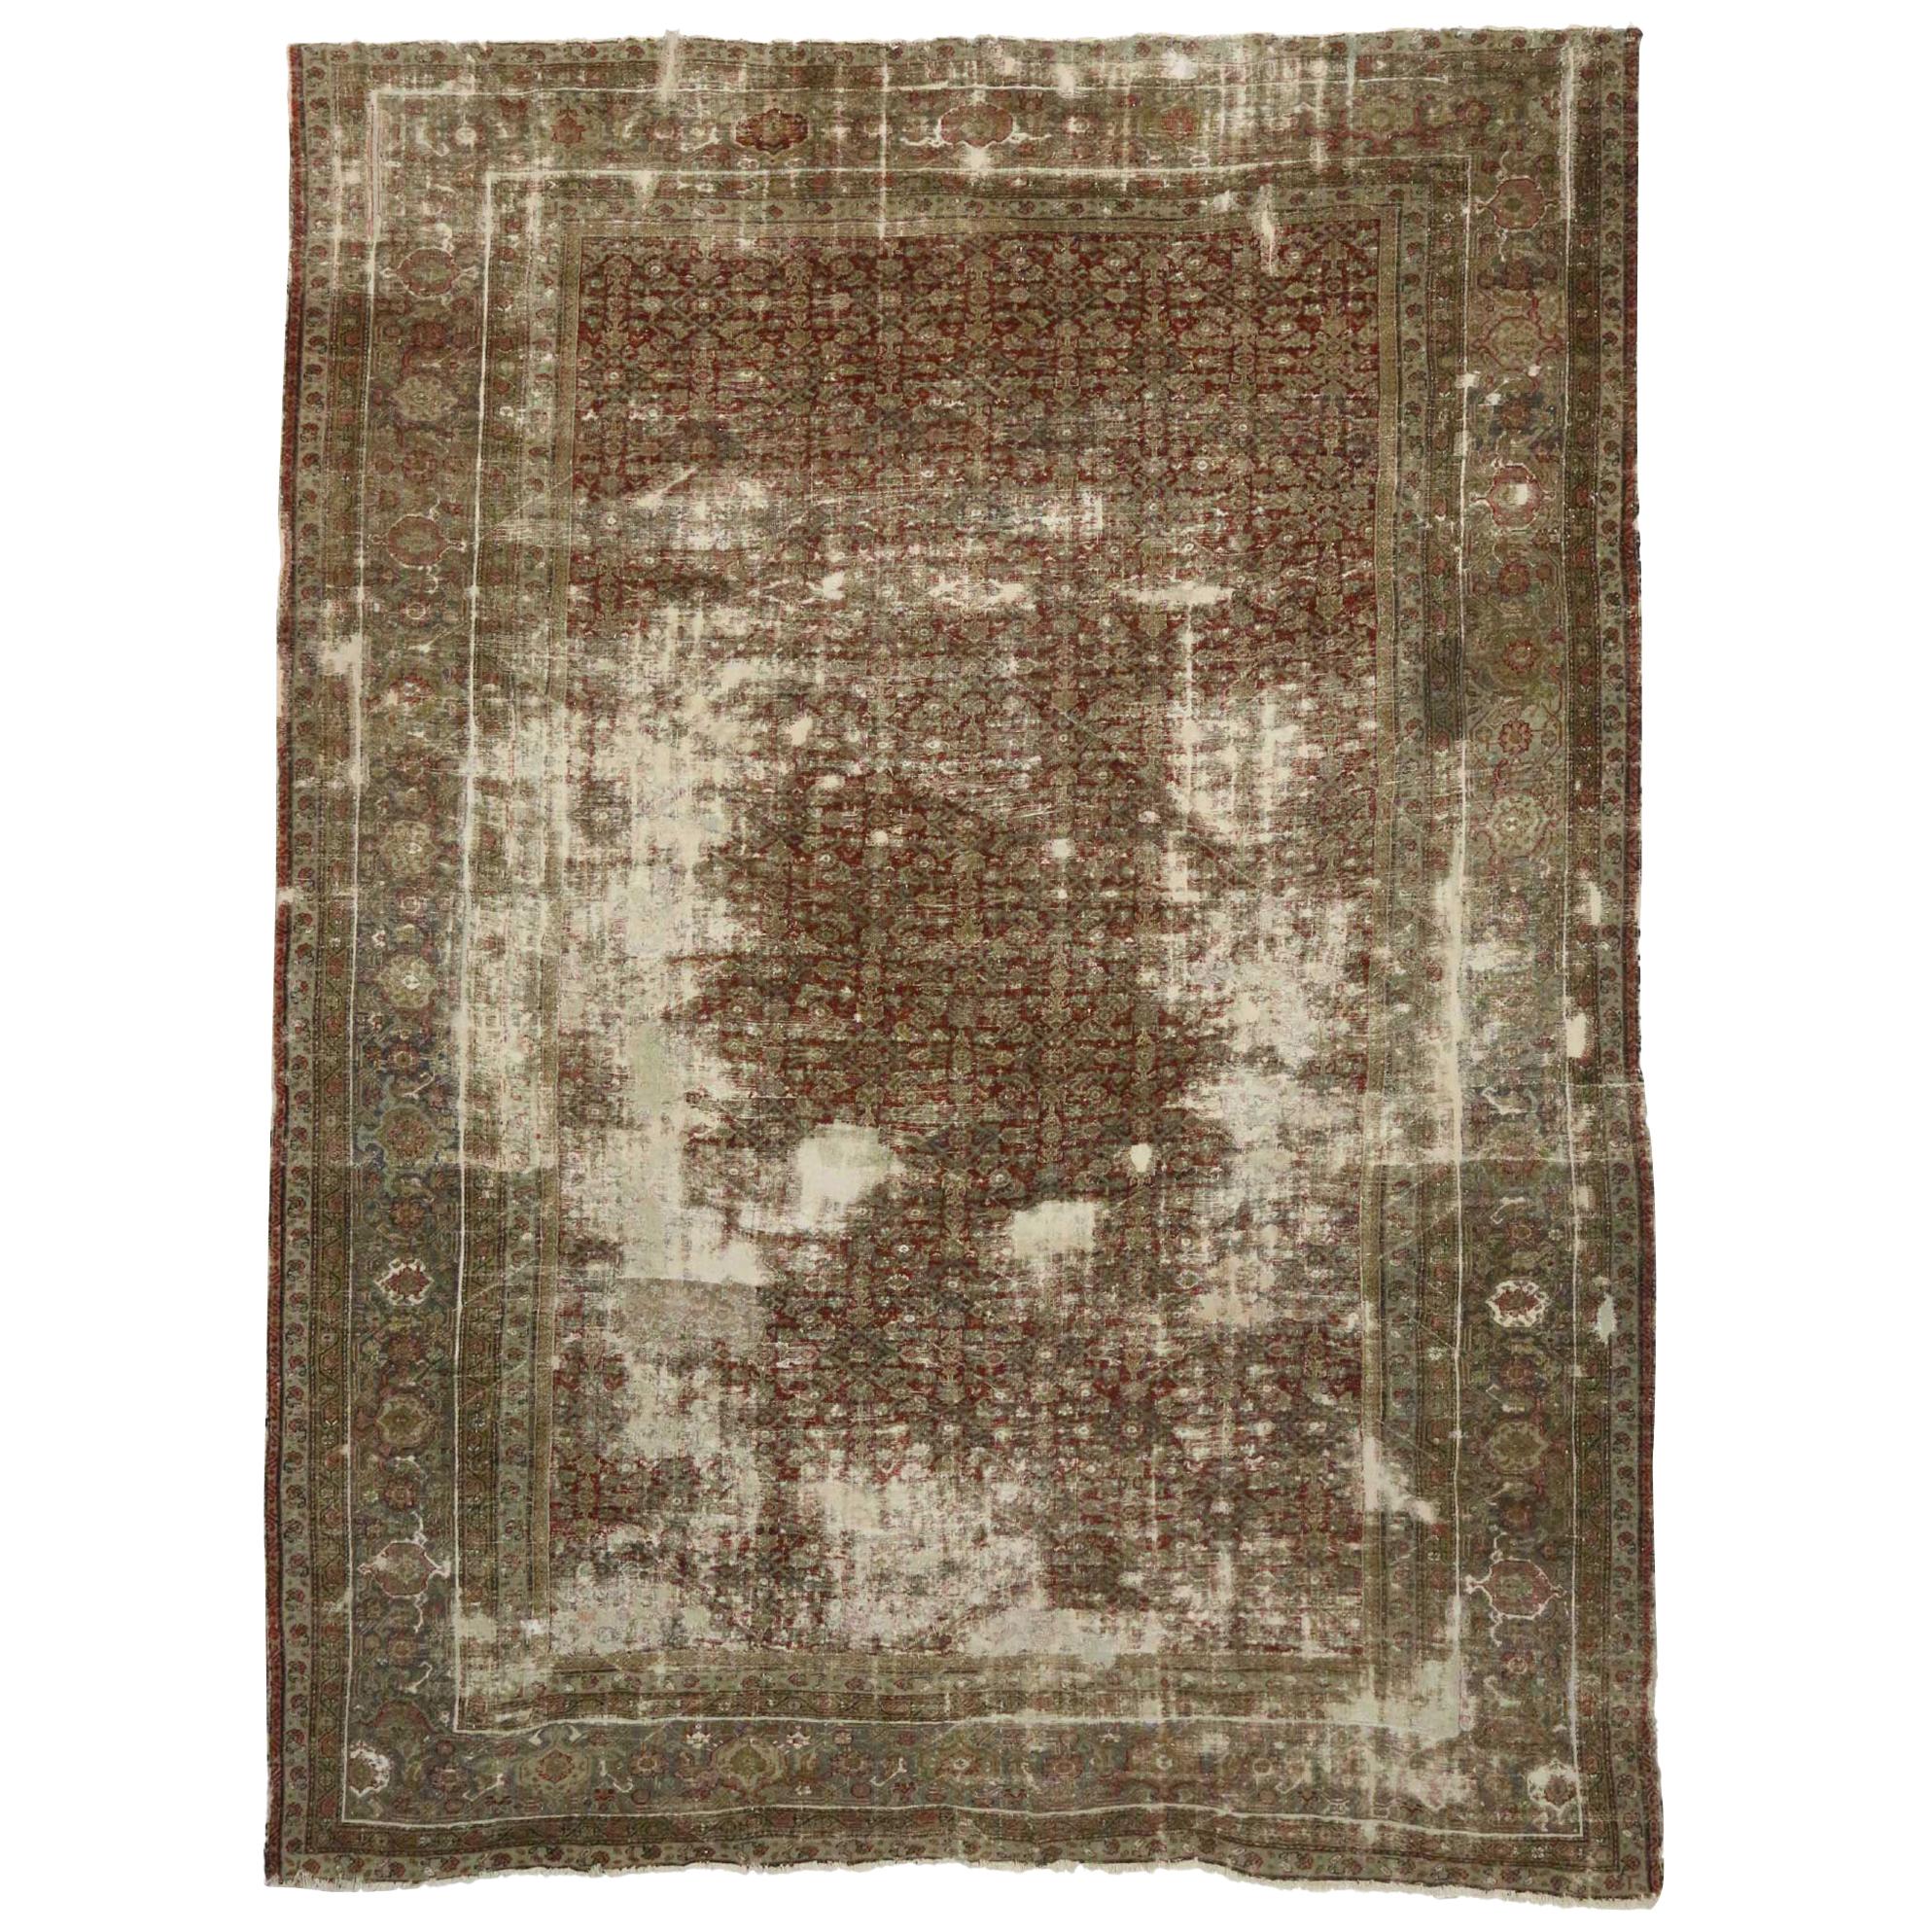 Antique-Worn Persian Sultanabad Rug, Weathered Beauty Meets Rustic Adirondack 